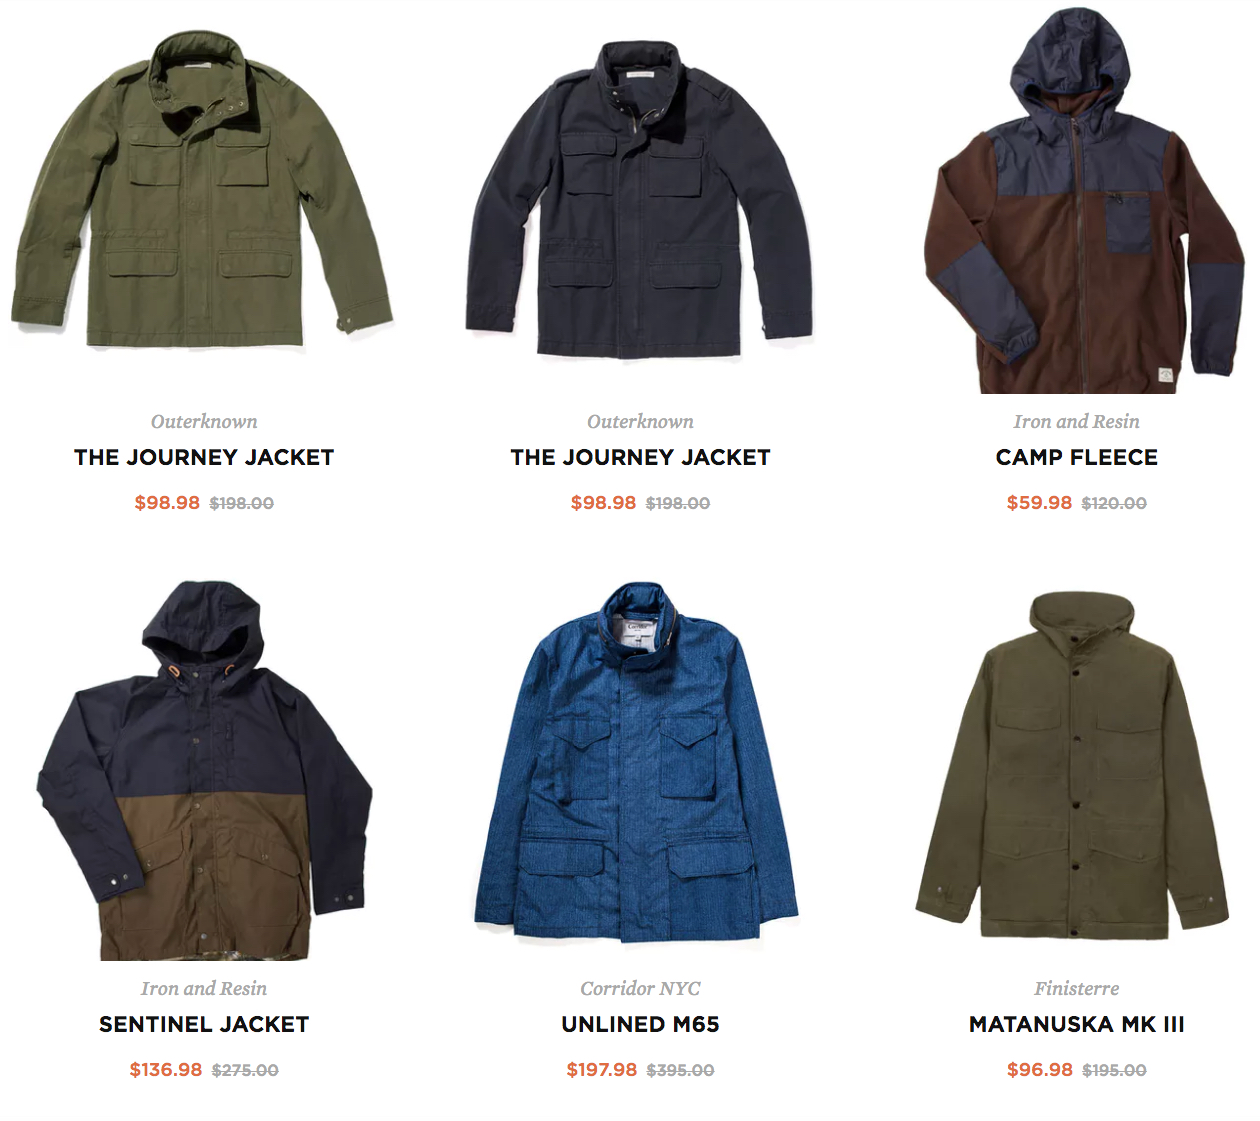 Shop Huckberry's Huge Outerwear Sale Today Because The Prices Go Up ...